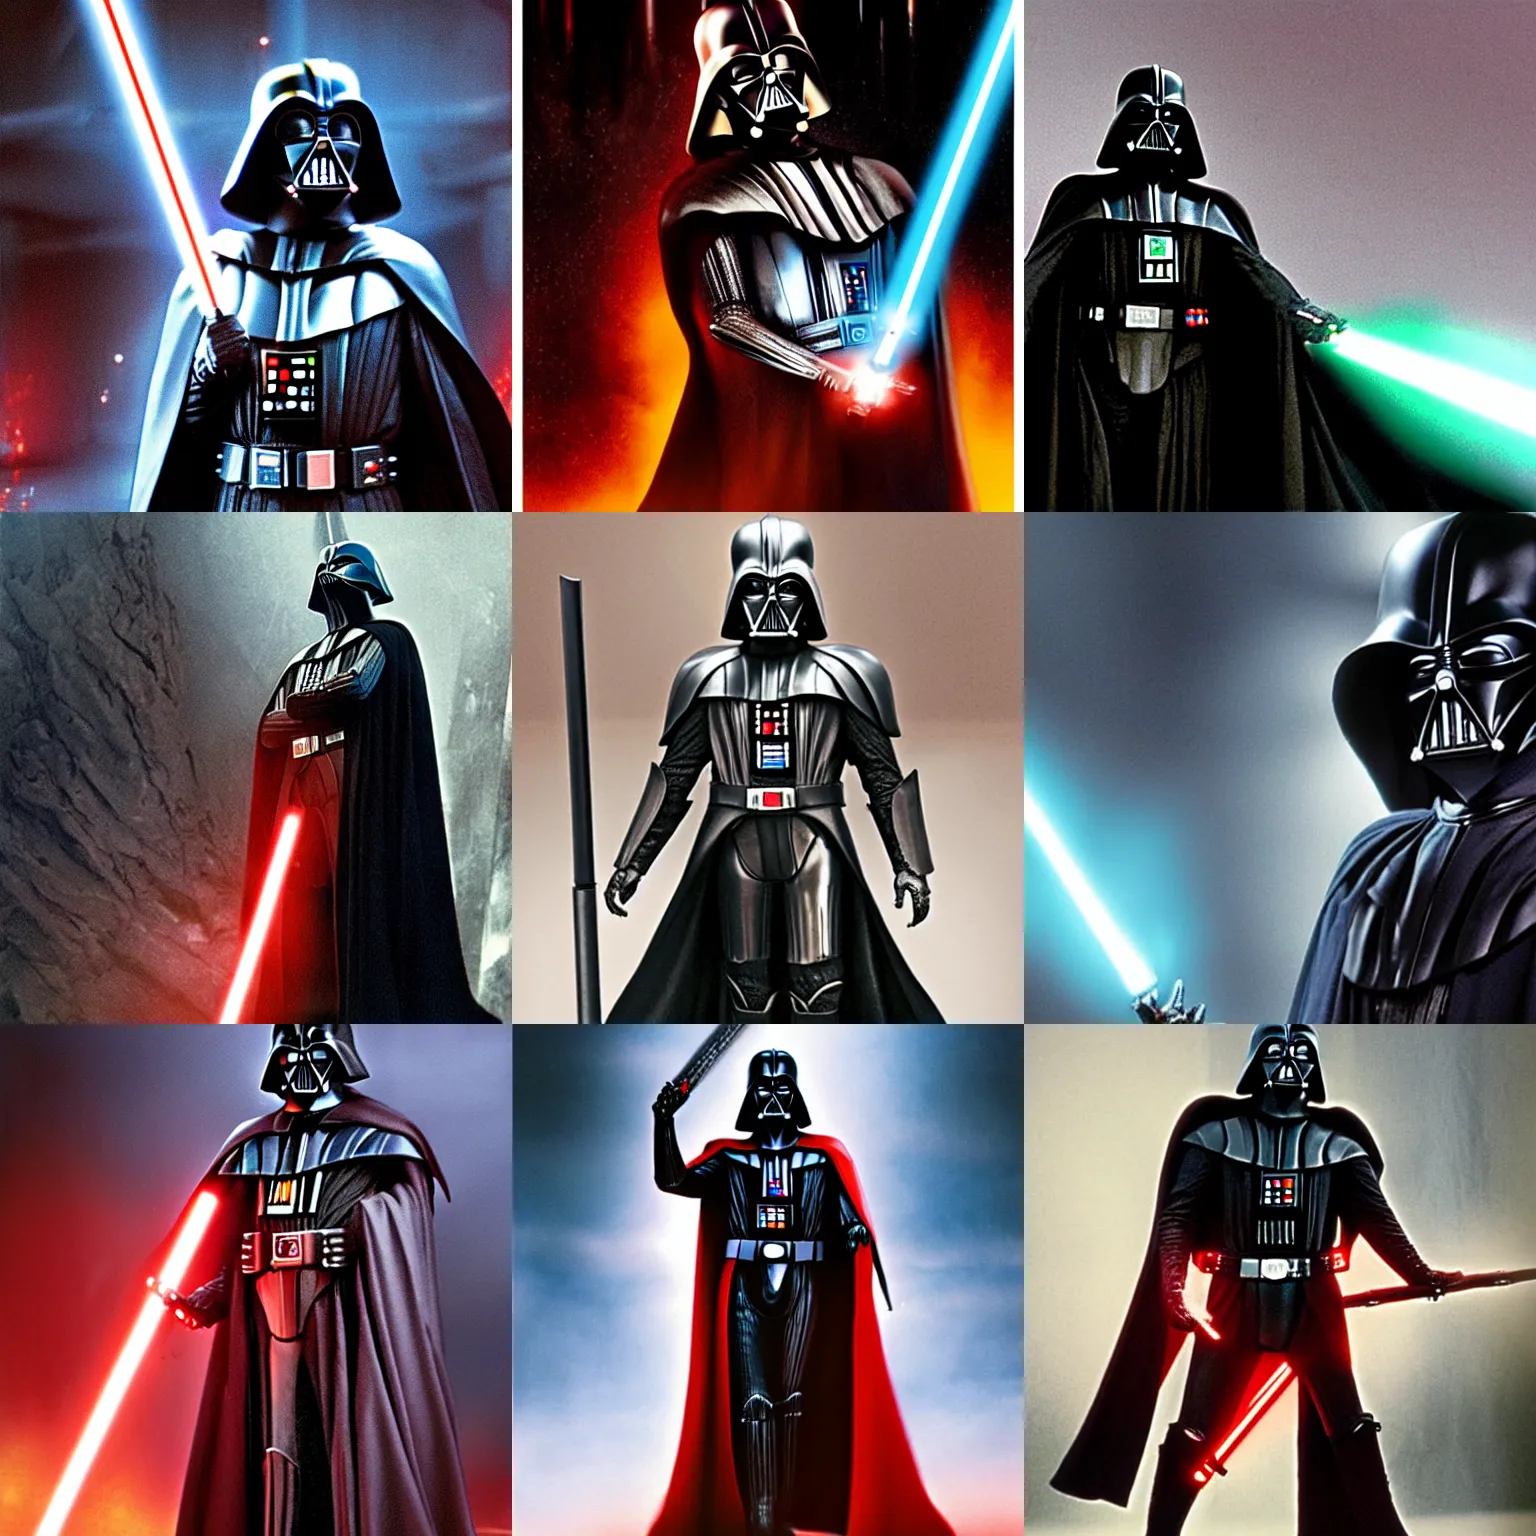 Prompt: Sauron as Darth Vader in the movie Star Wars